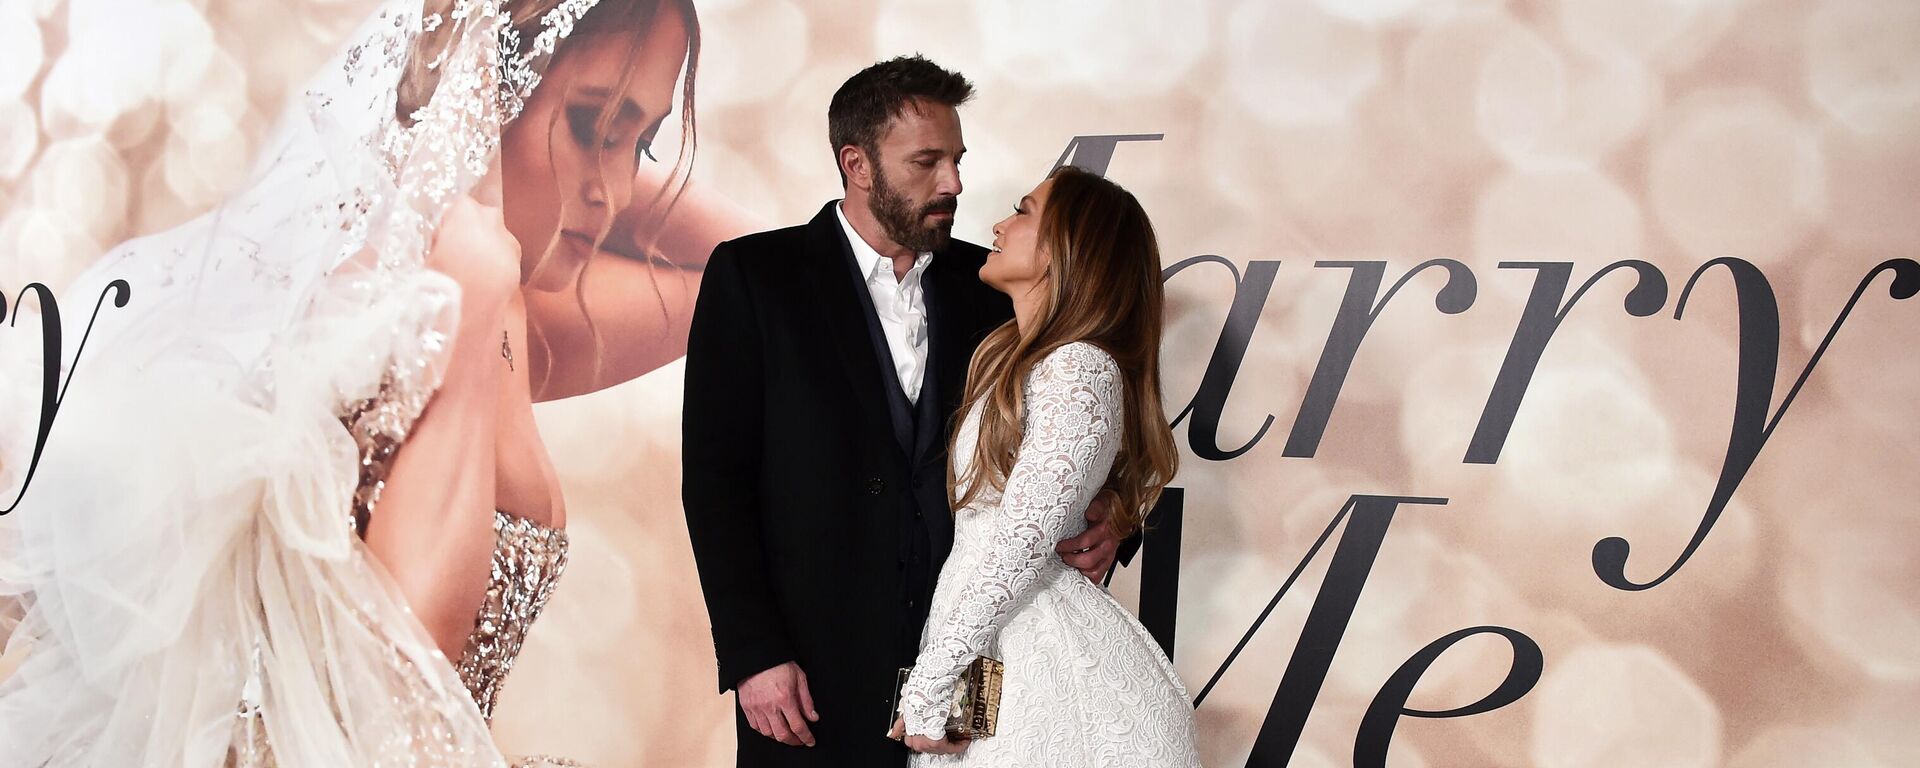 Cast member Jennifer Lopez, right, and Ben Affleck attend a photo call for a special screening of Marry Me at DGA Theater on Tuesday, Feb. 8, 2022, in Los Angeles. - Sputnik International, 1920, 09.04.2022